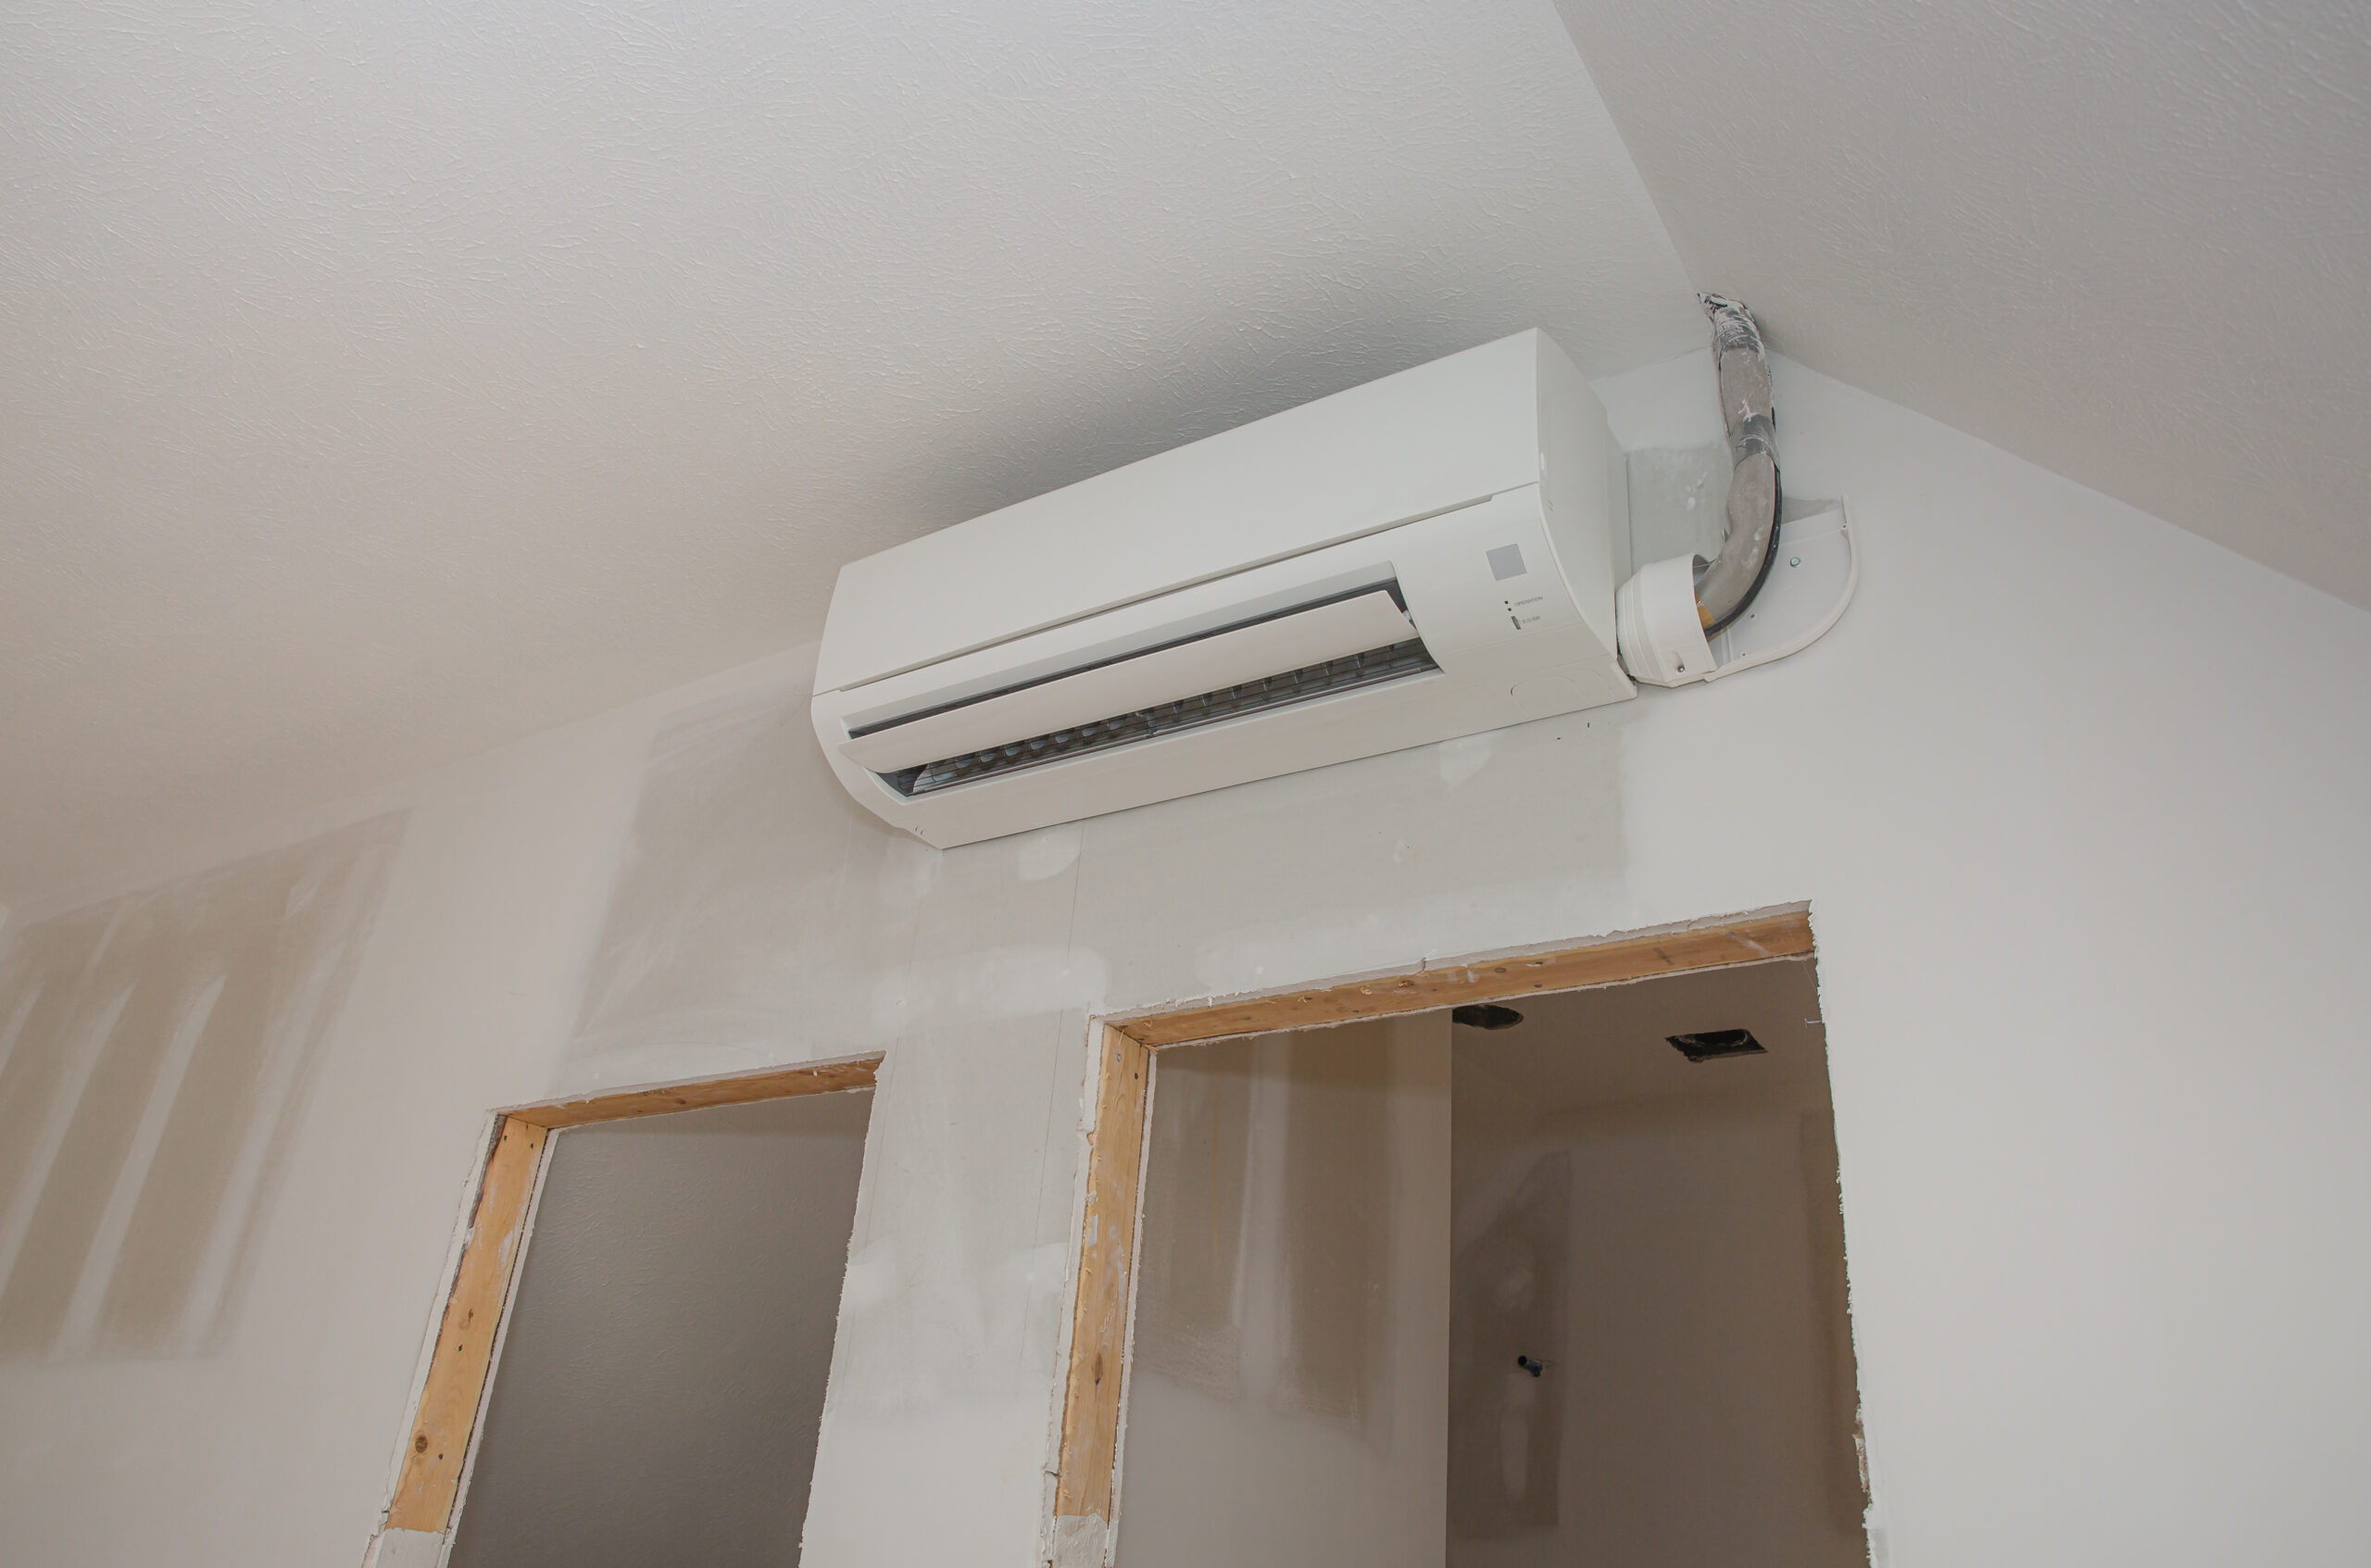 Mini Split Ductless Air Conditioning Unit Installed In Unfinished Room